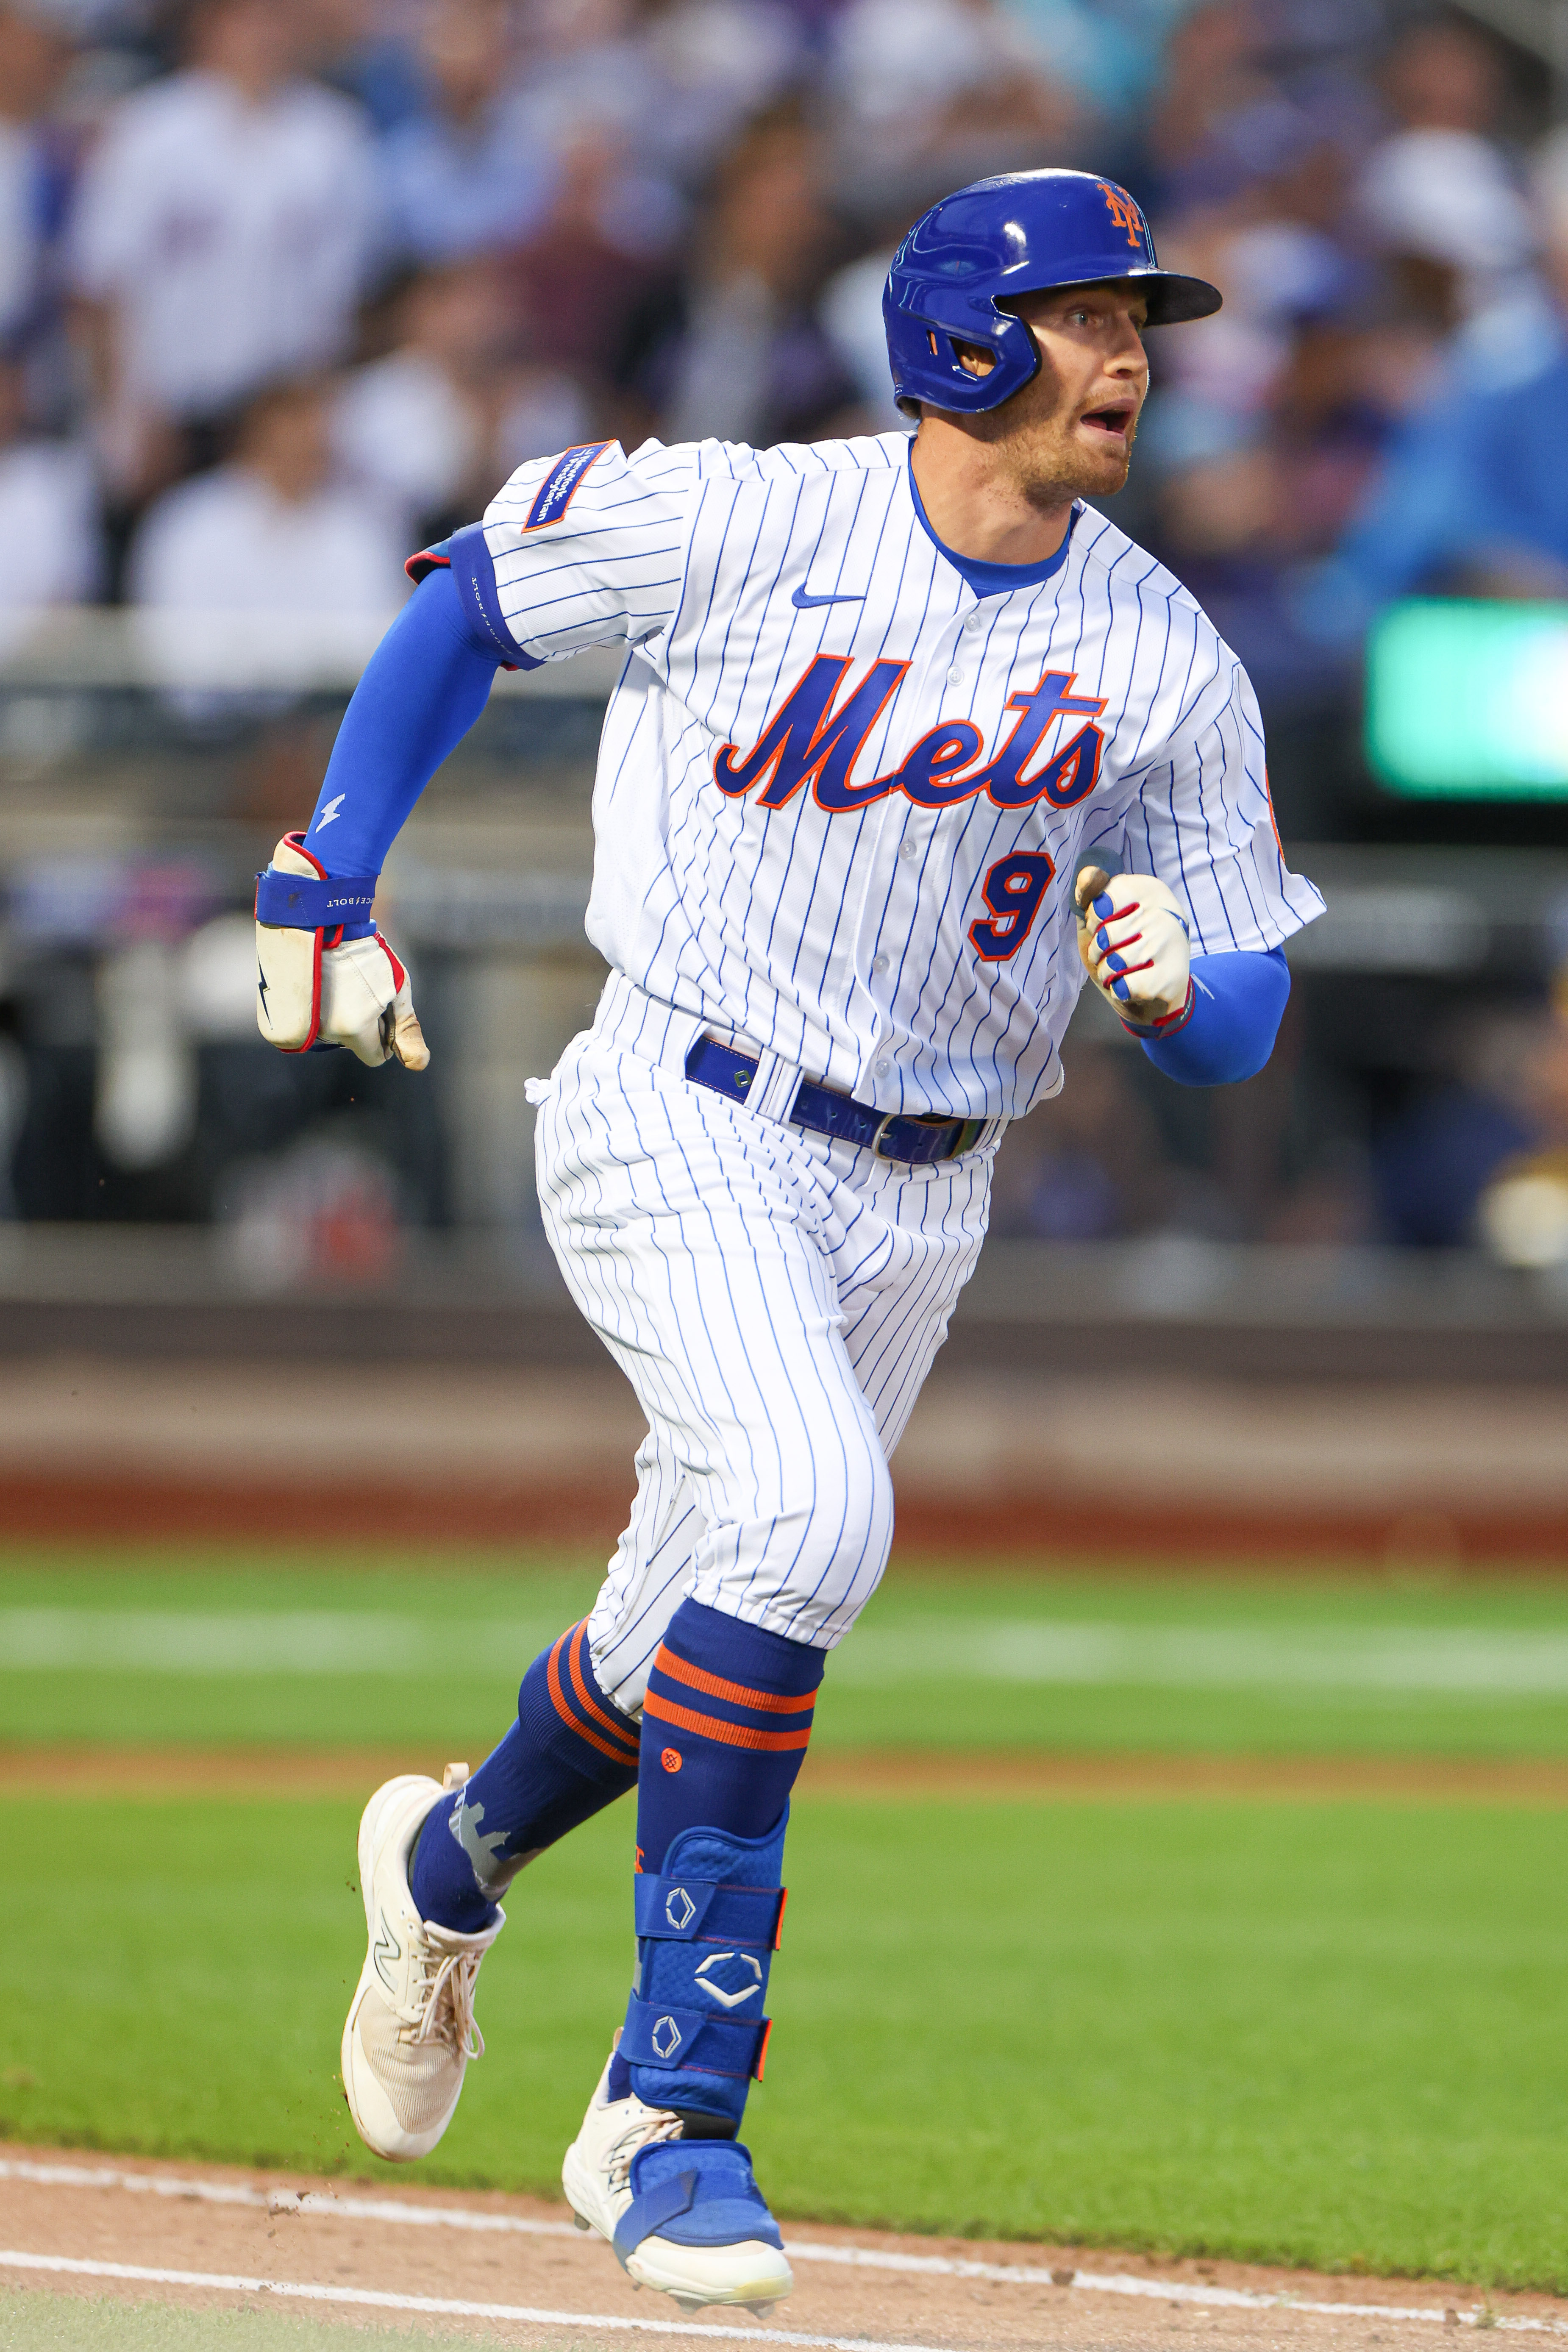 David Peterson, 4 HRs lead Mets past Brewers